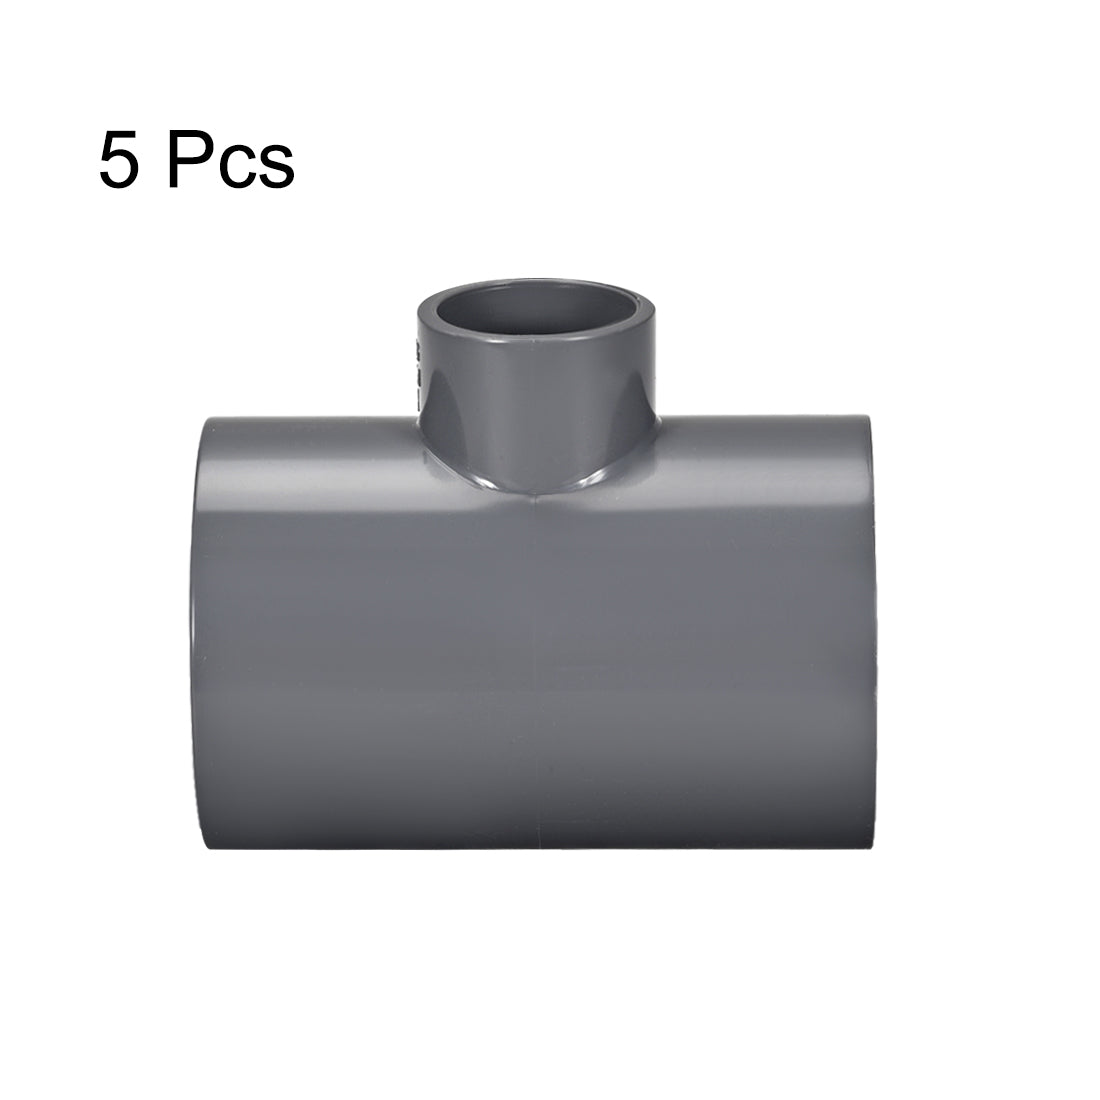 uxcell Uxcell PVC Pipe Fitting Tee 401-Series Gray 1-inch x 2-inch Socket 5pcs